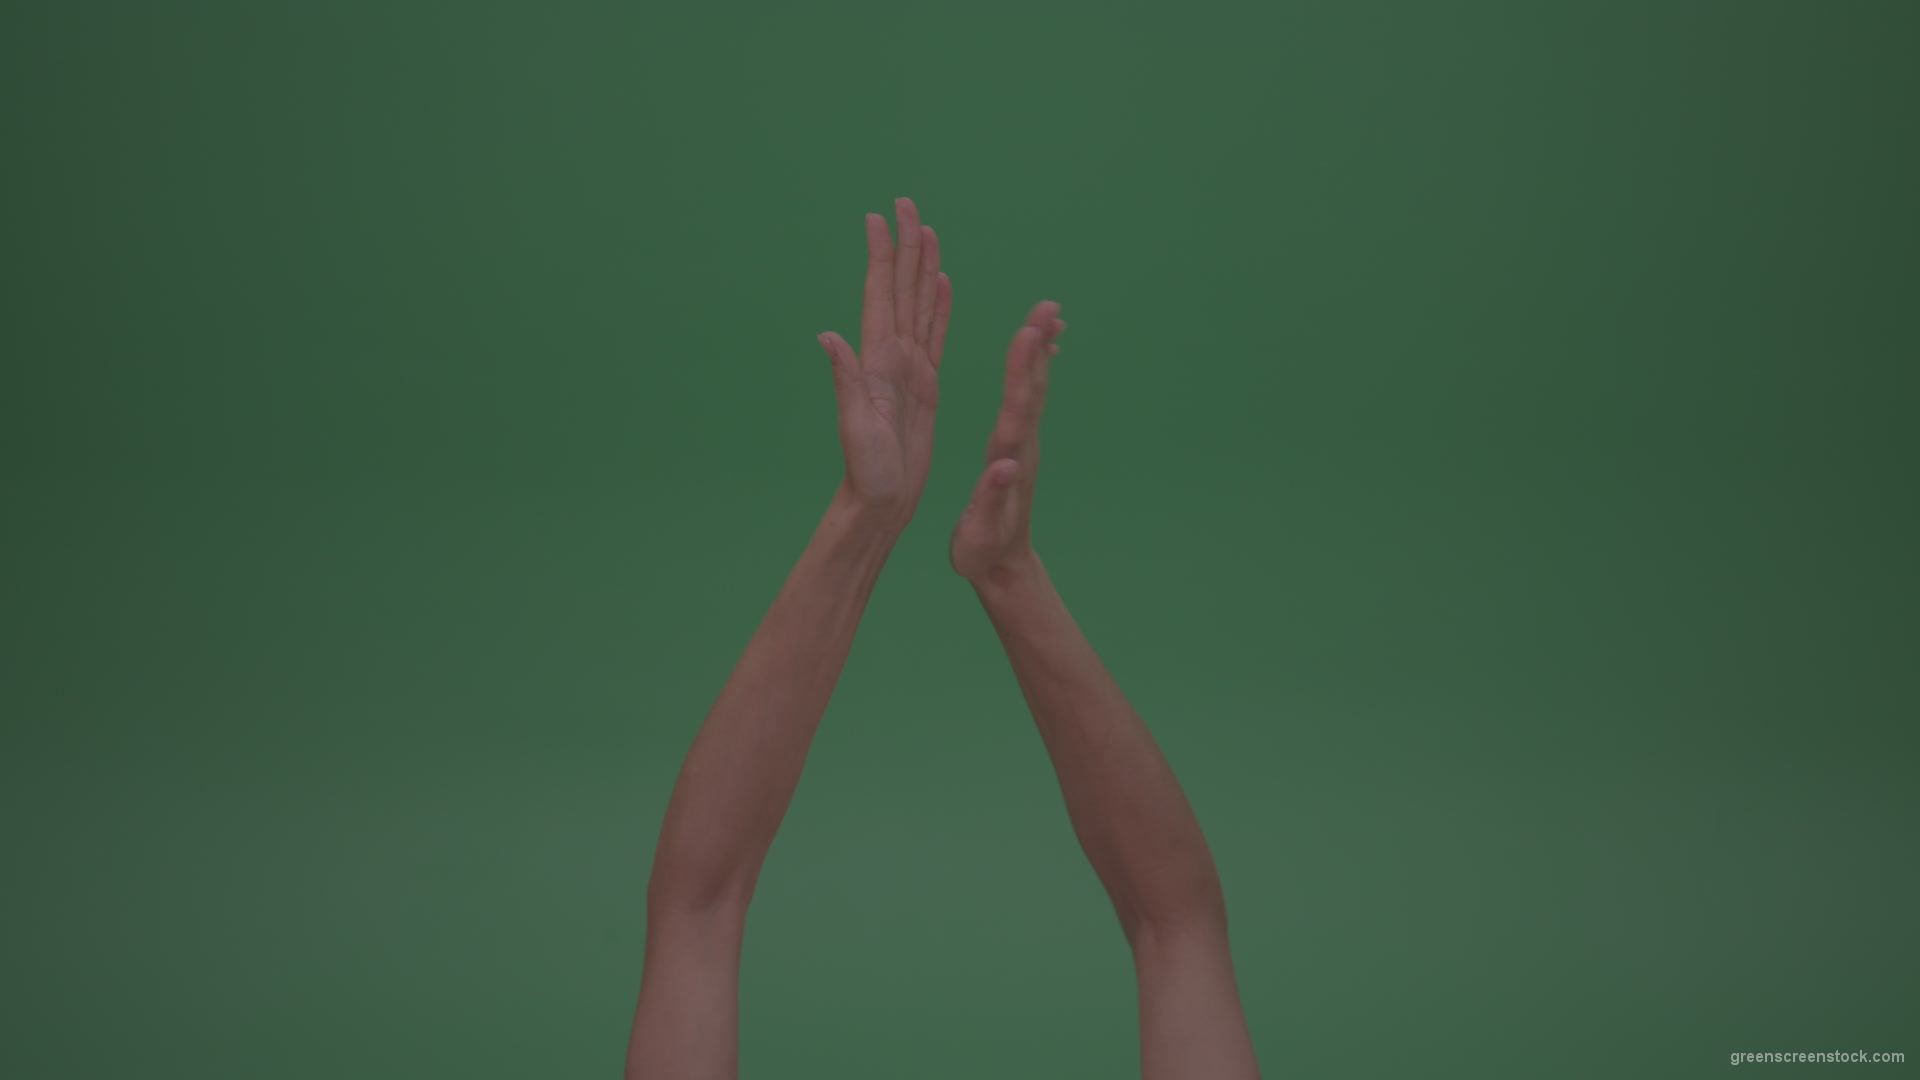 Rapidly-Clapping-Young-FemaleHands-Ovation-GreenScreenWall-ChromaKey-Background_005 Green Screen Stock